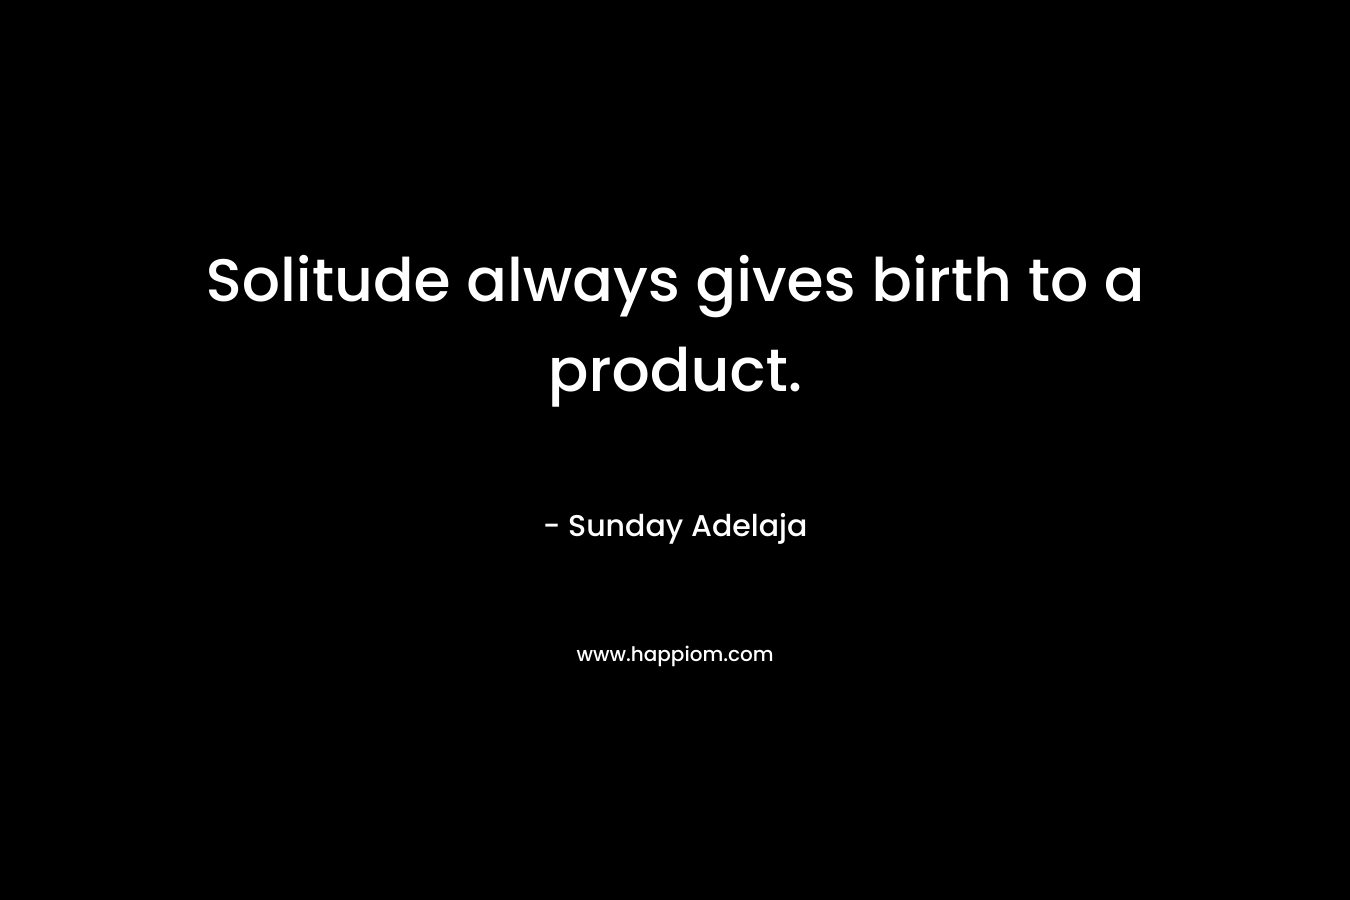 Solitude always gives birth to a product.